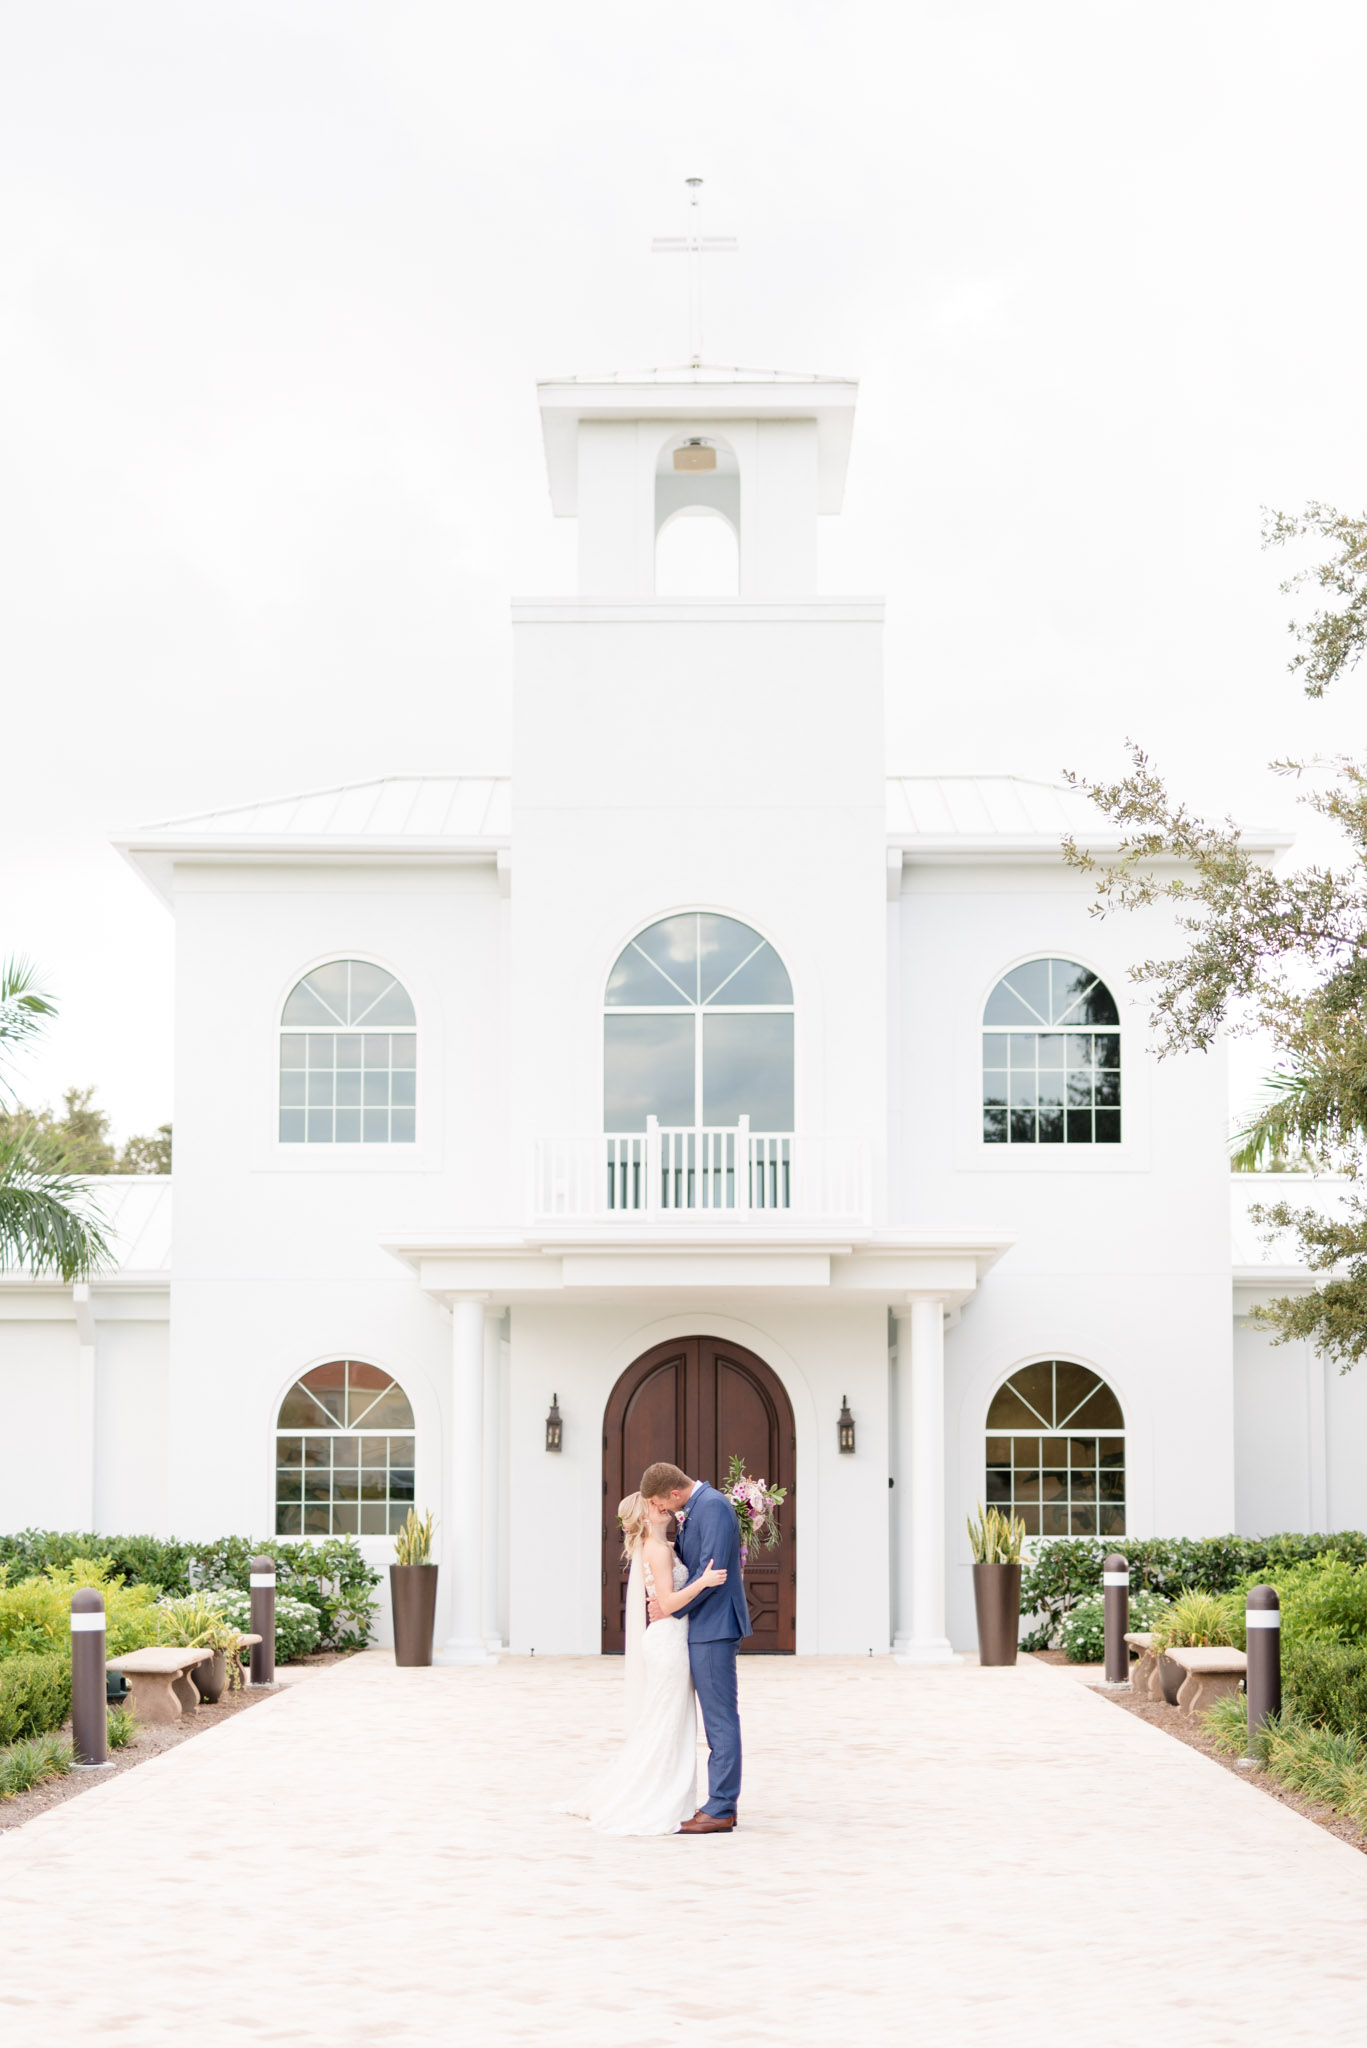 Bride and groom kiss in front of white chapel.